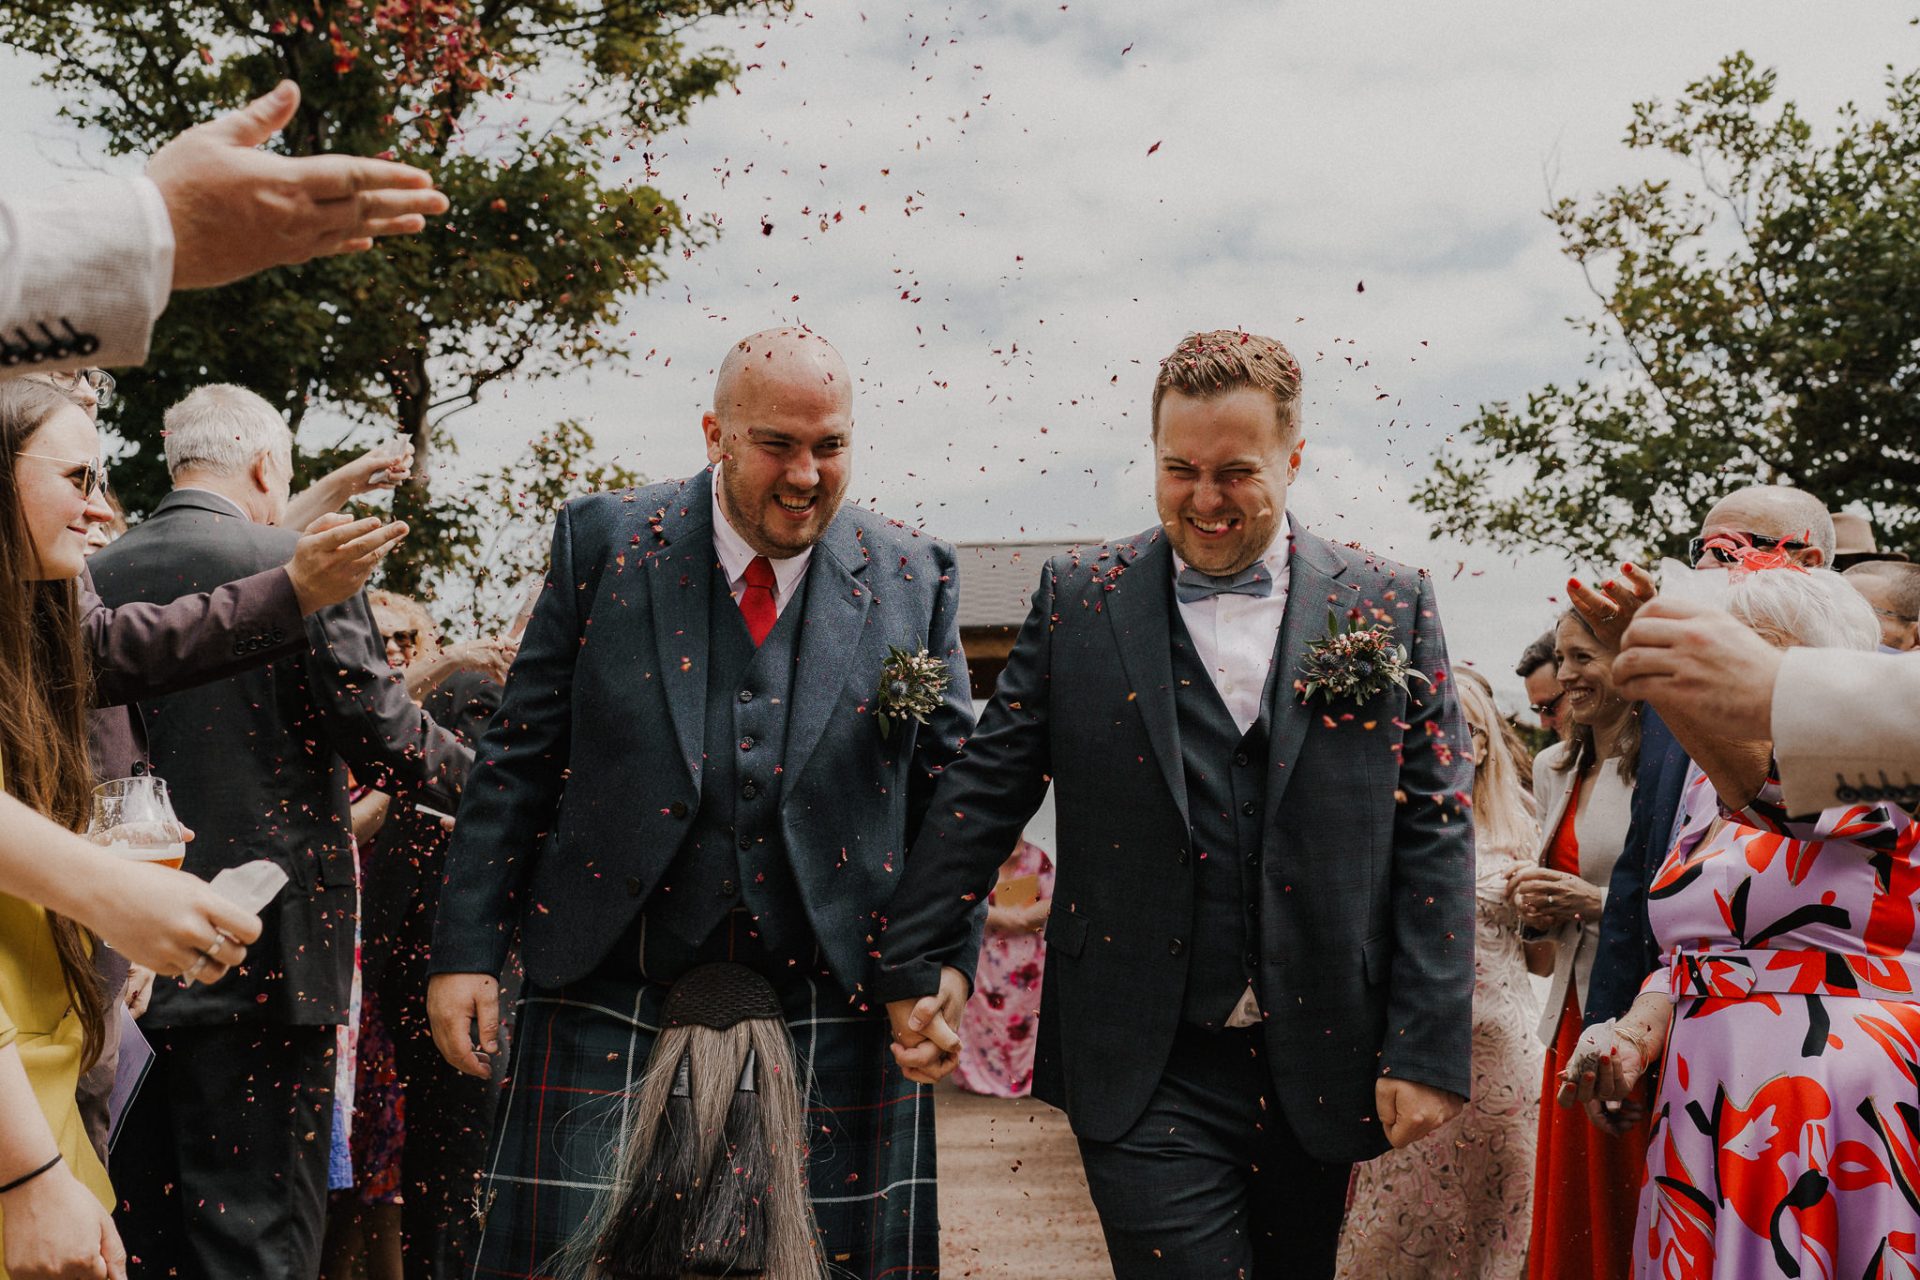 Wedding photographs capturing two happy grooms walking down the aisle amidst confetti.